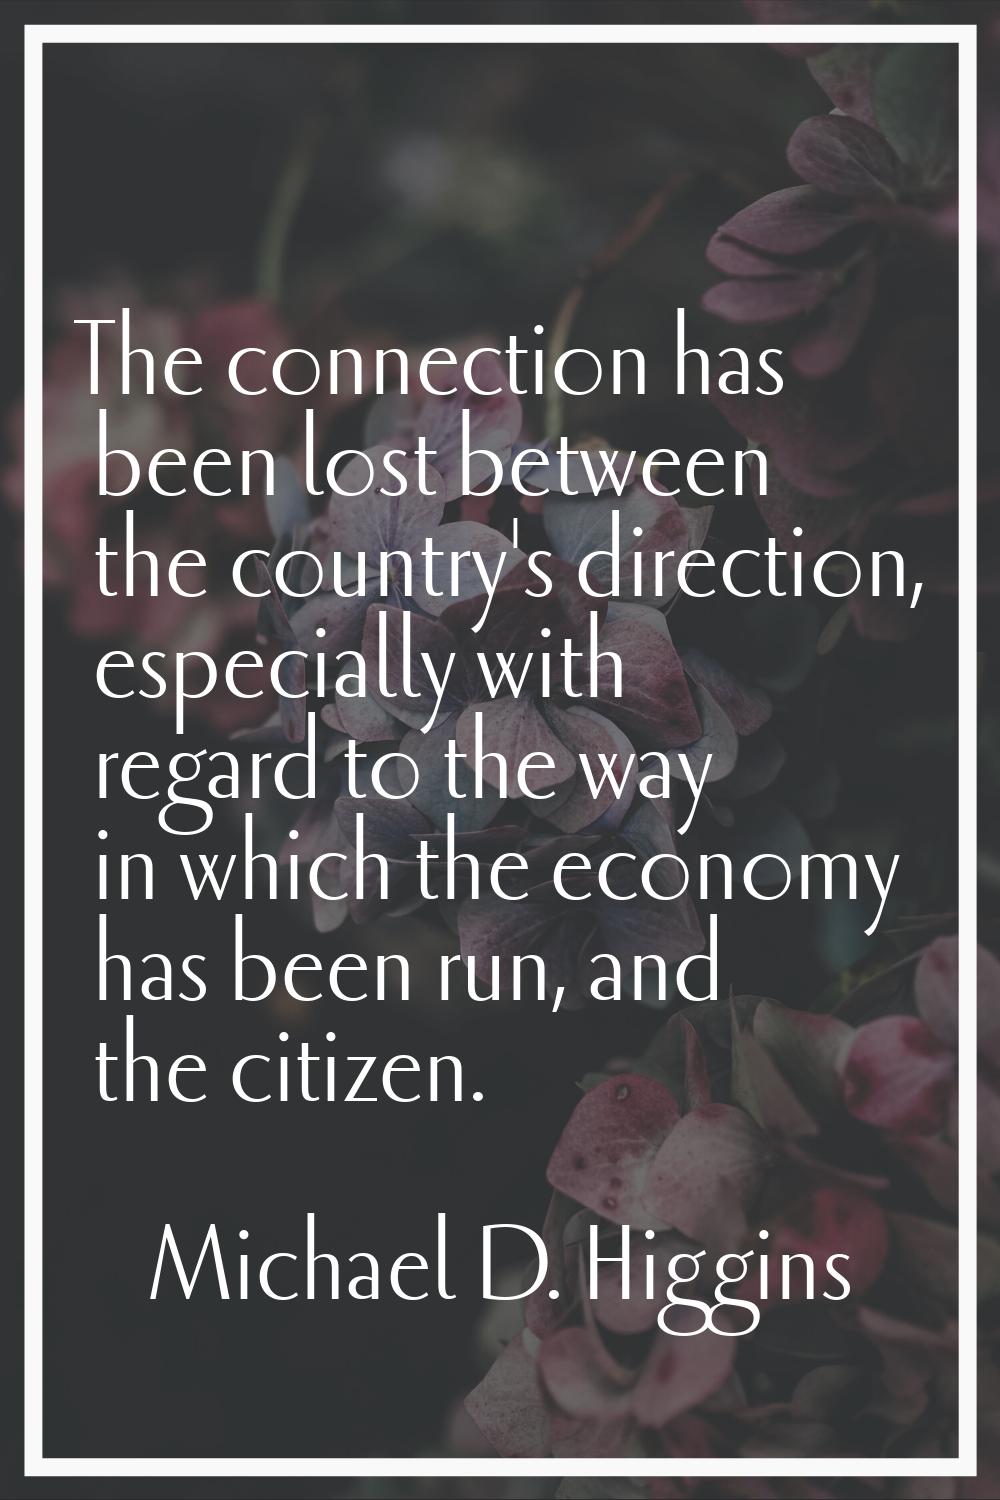 The connection has been lost between the country's direction, especially with regard to the way in 